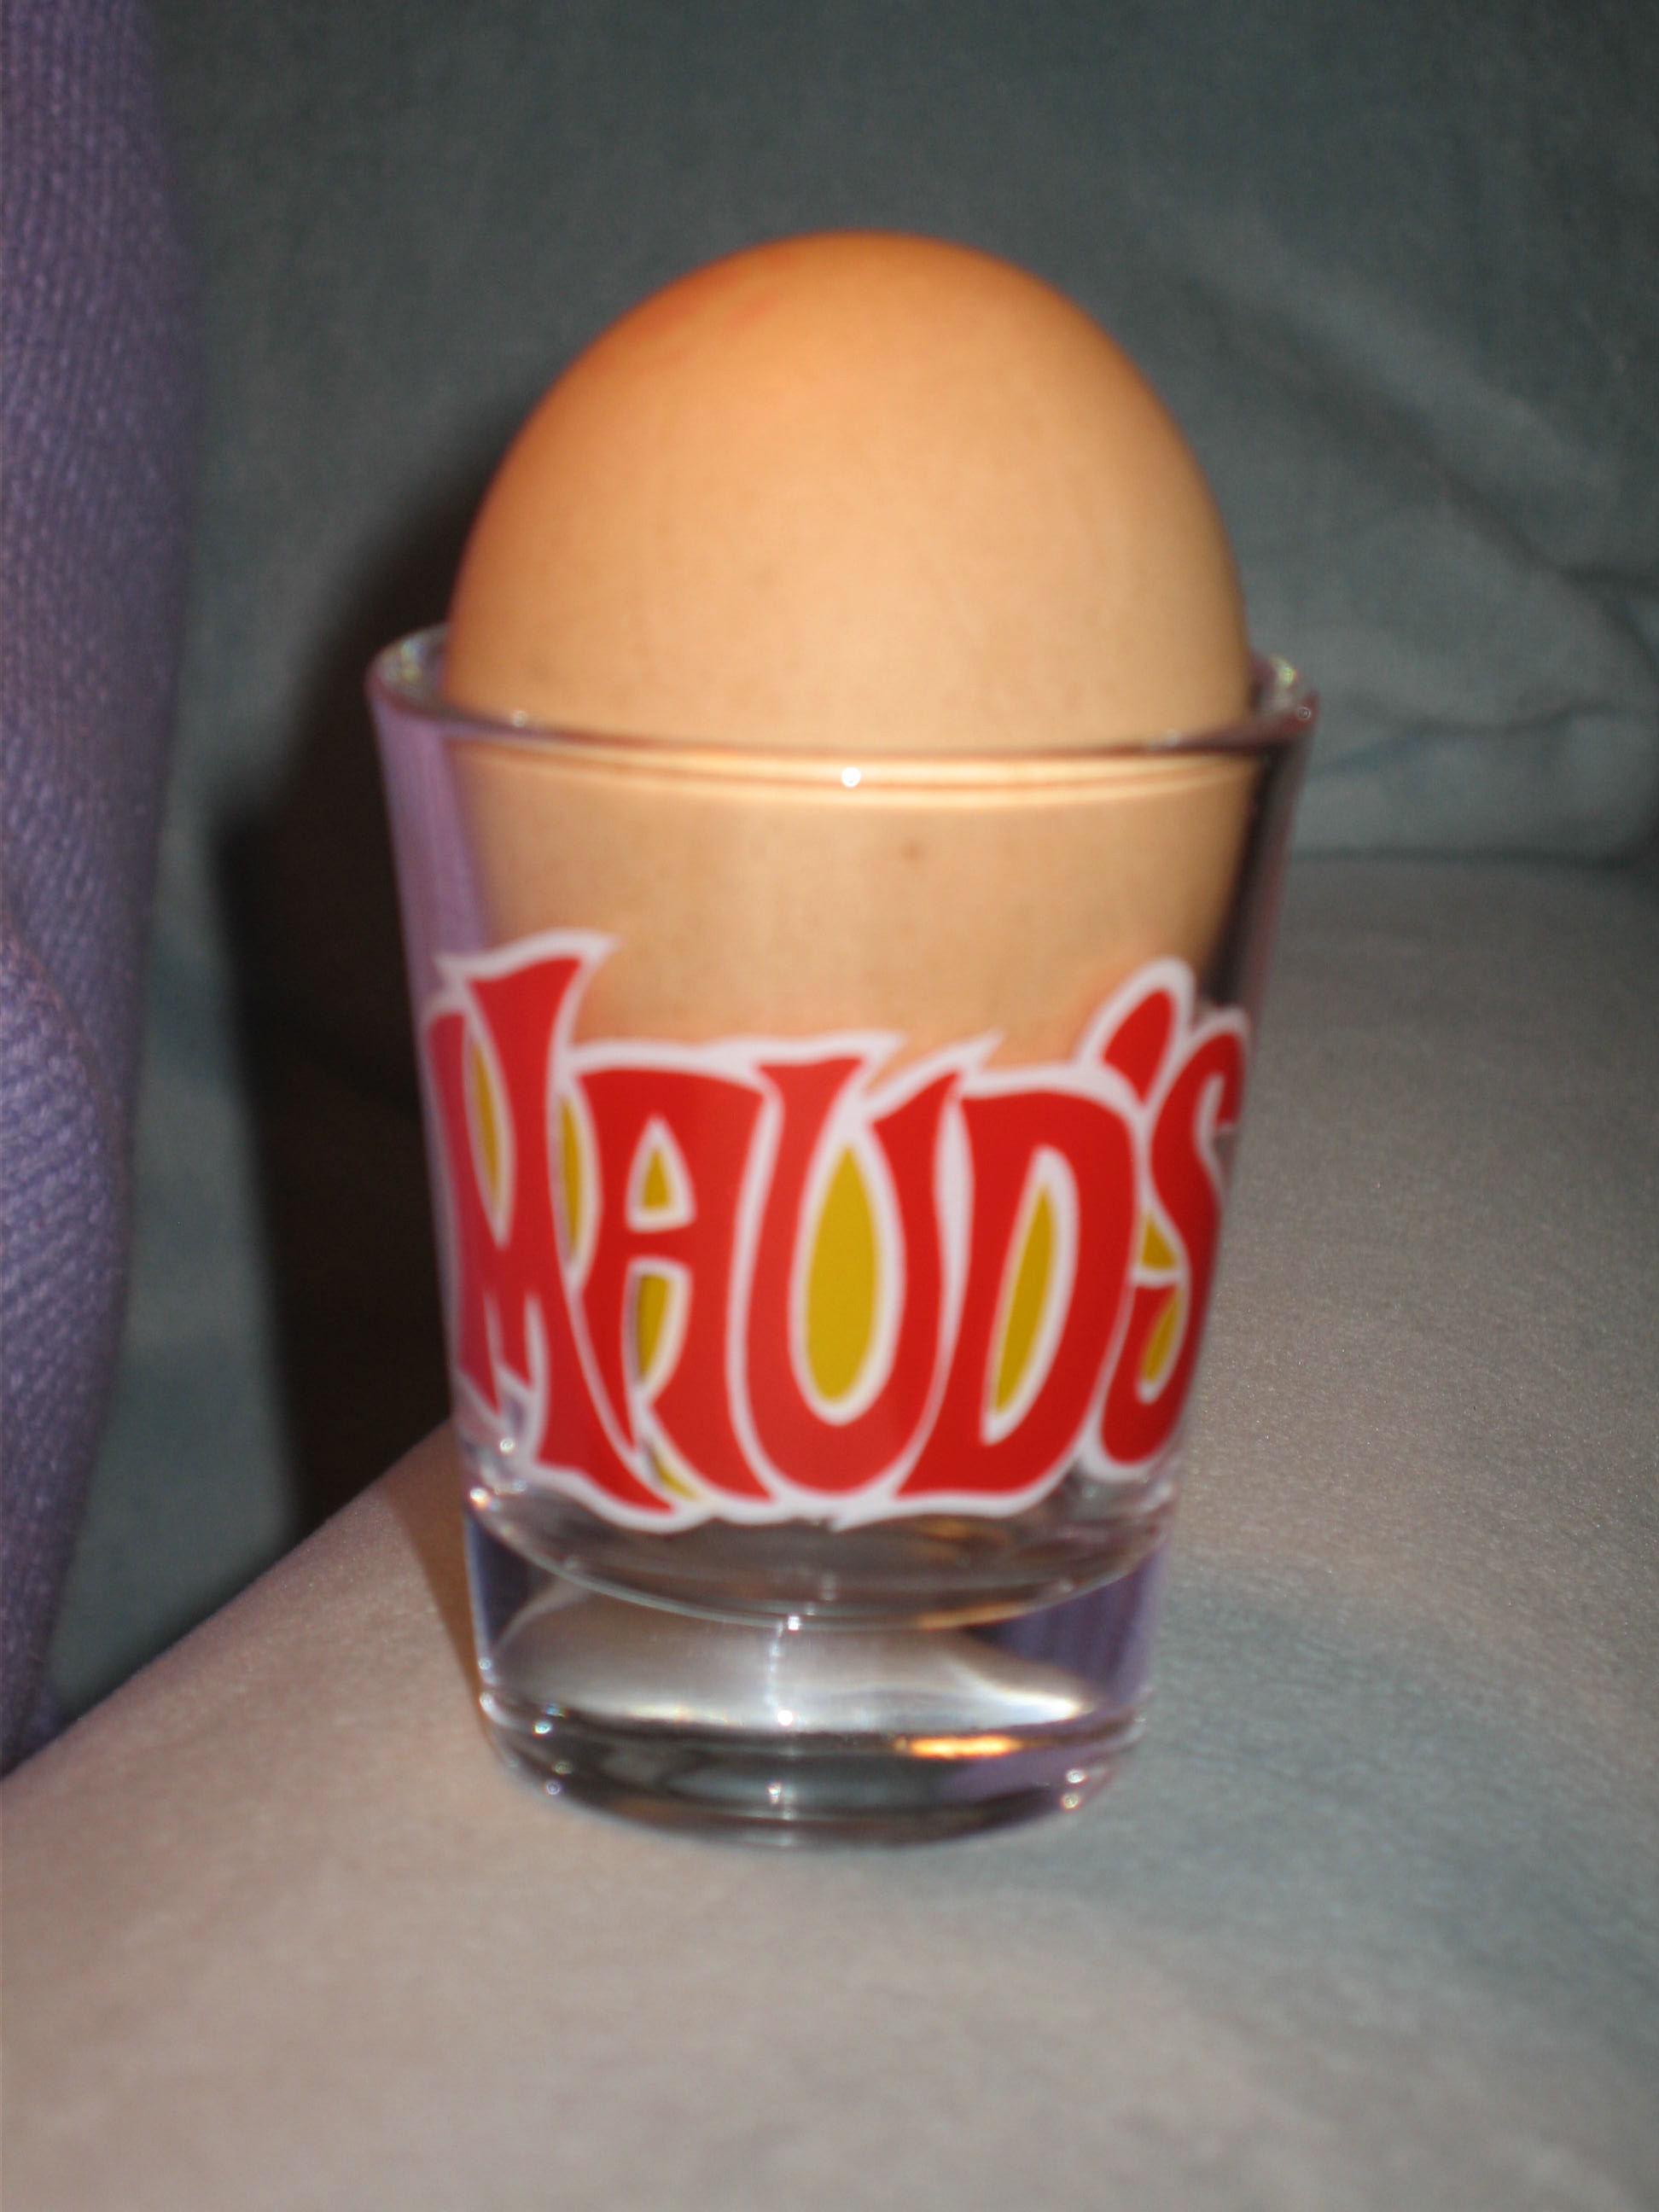  Mother Mary prefers an egg to a shot in her glass and says it makes a great stocking stuffer.  